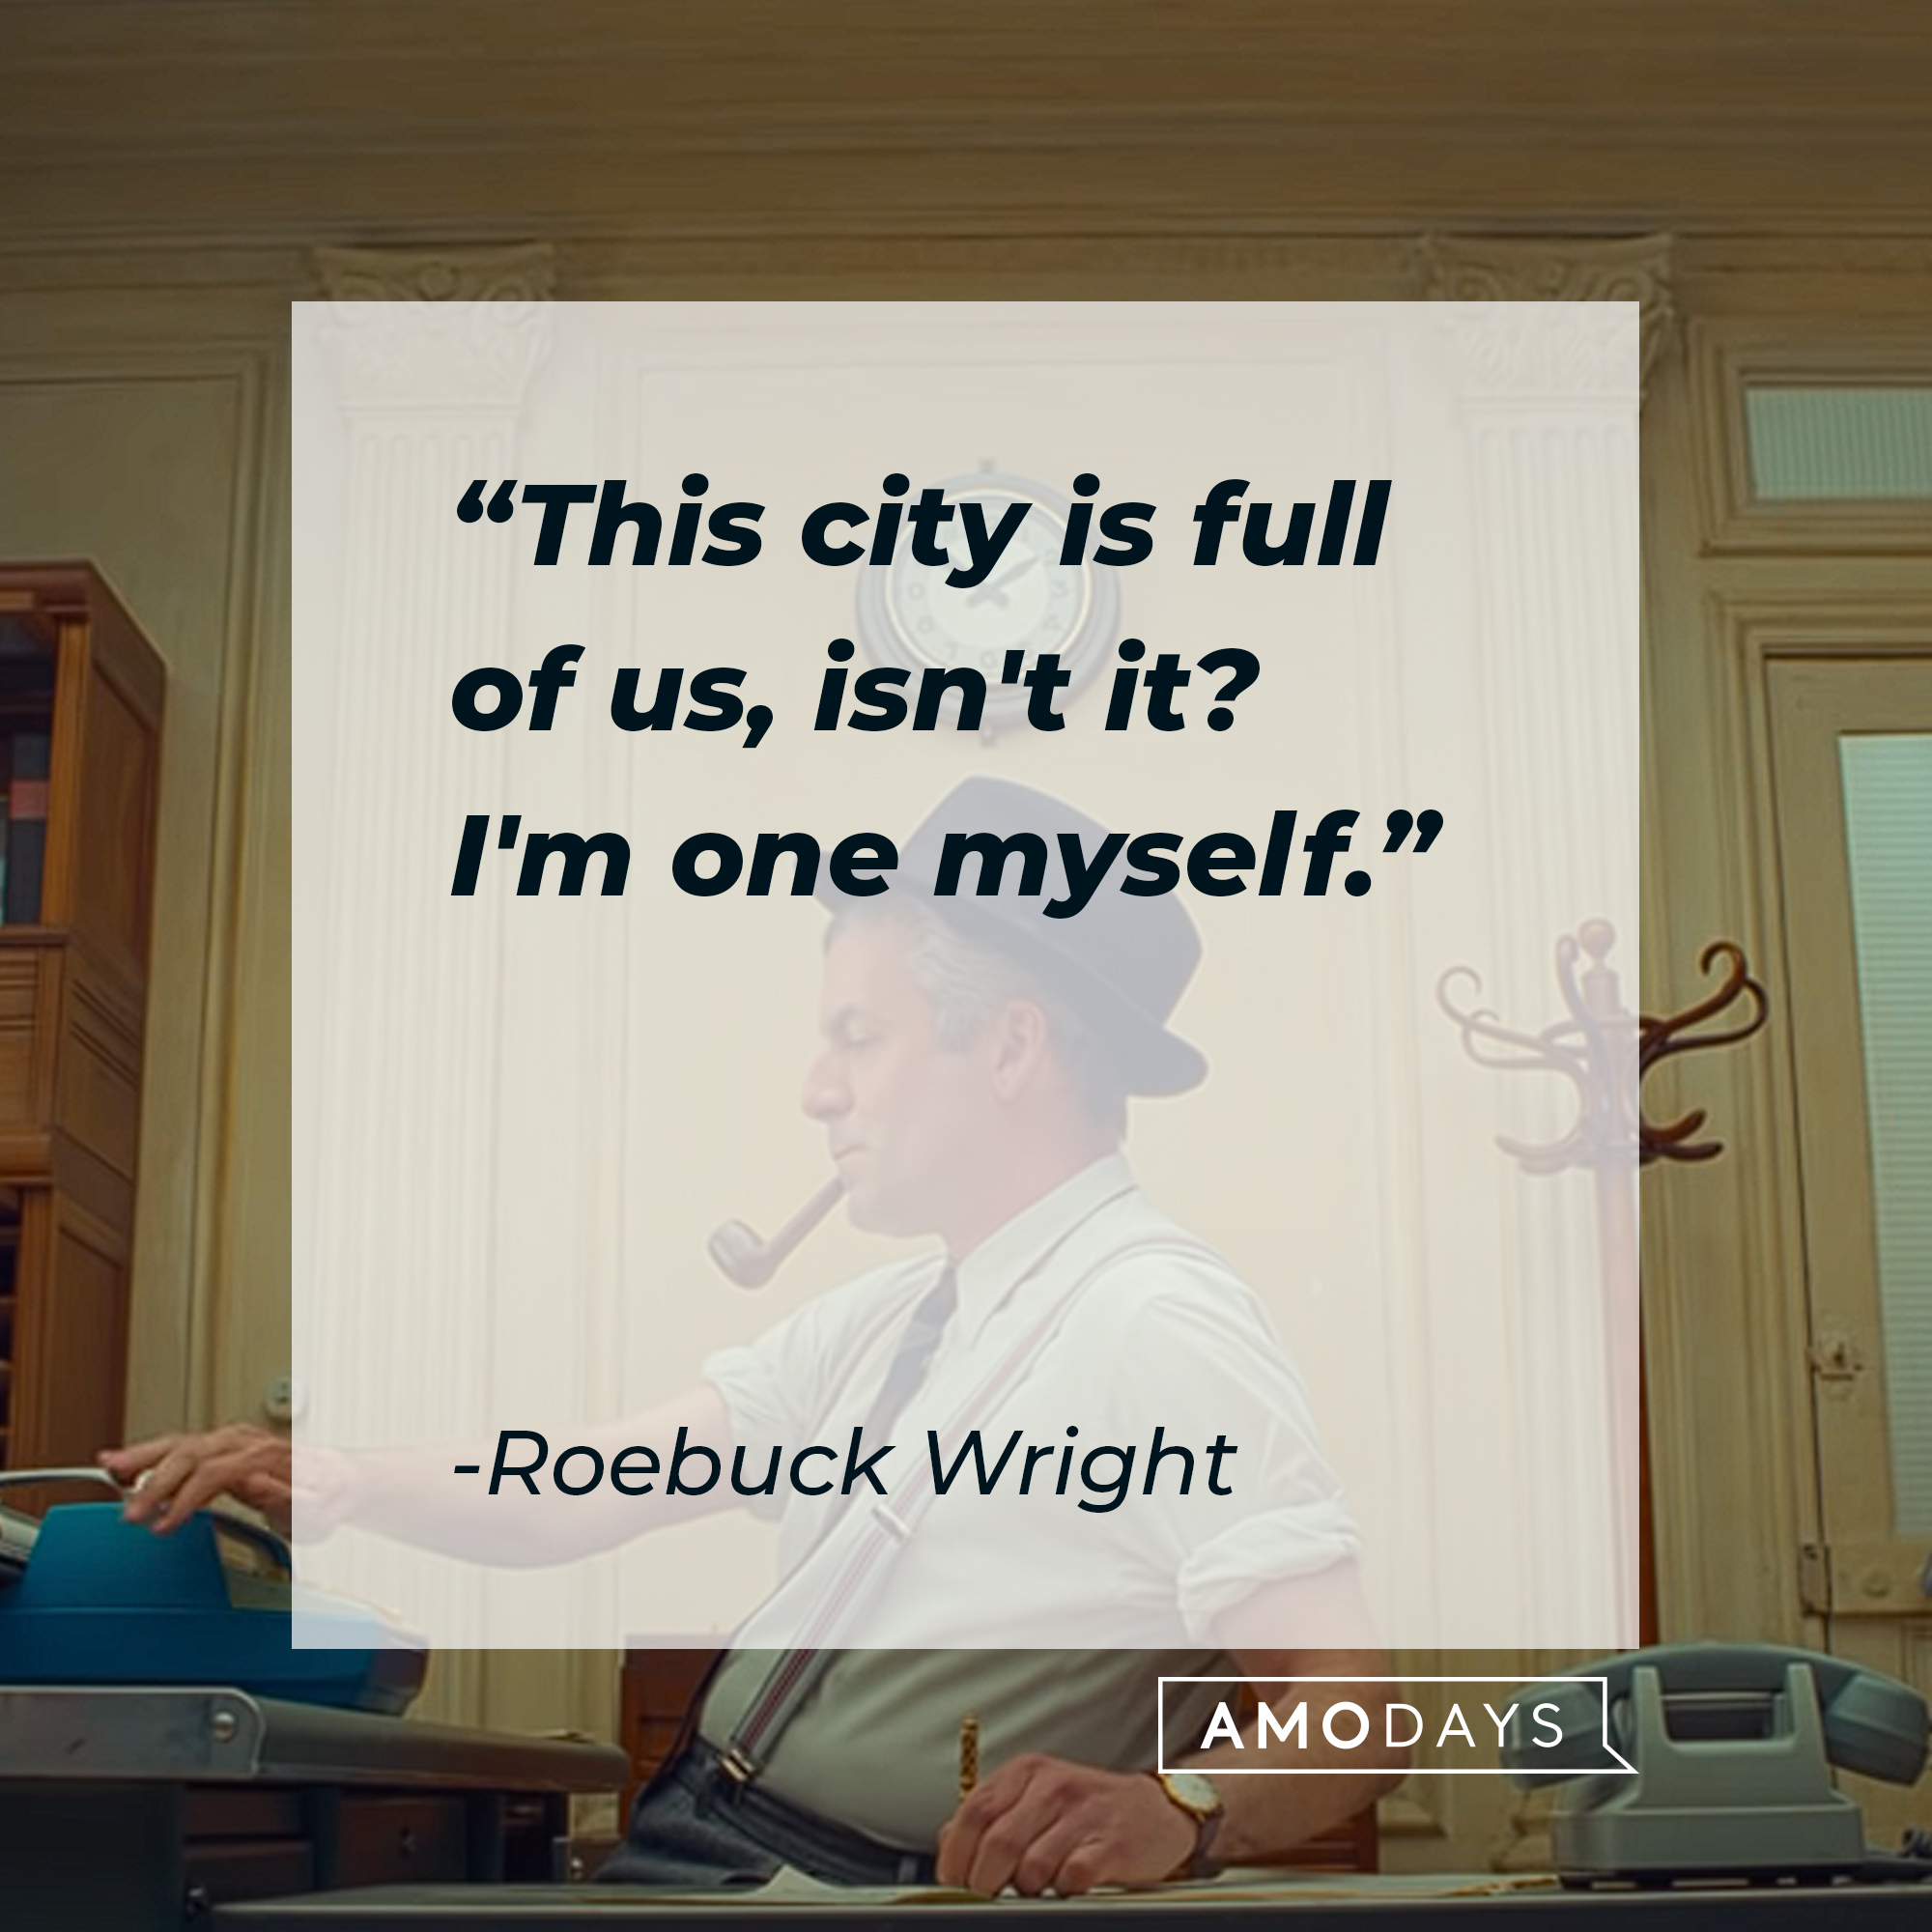 Roebuck Wright's quote: "This city is full of us, isn't it? I'm one myself." | Source: youtube.com/searchlightpictures